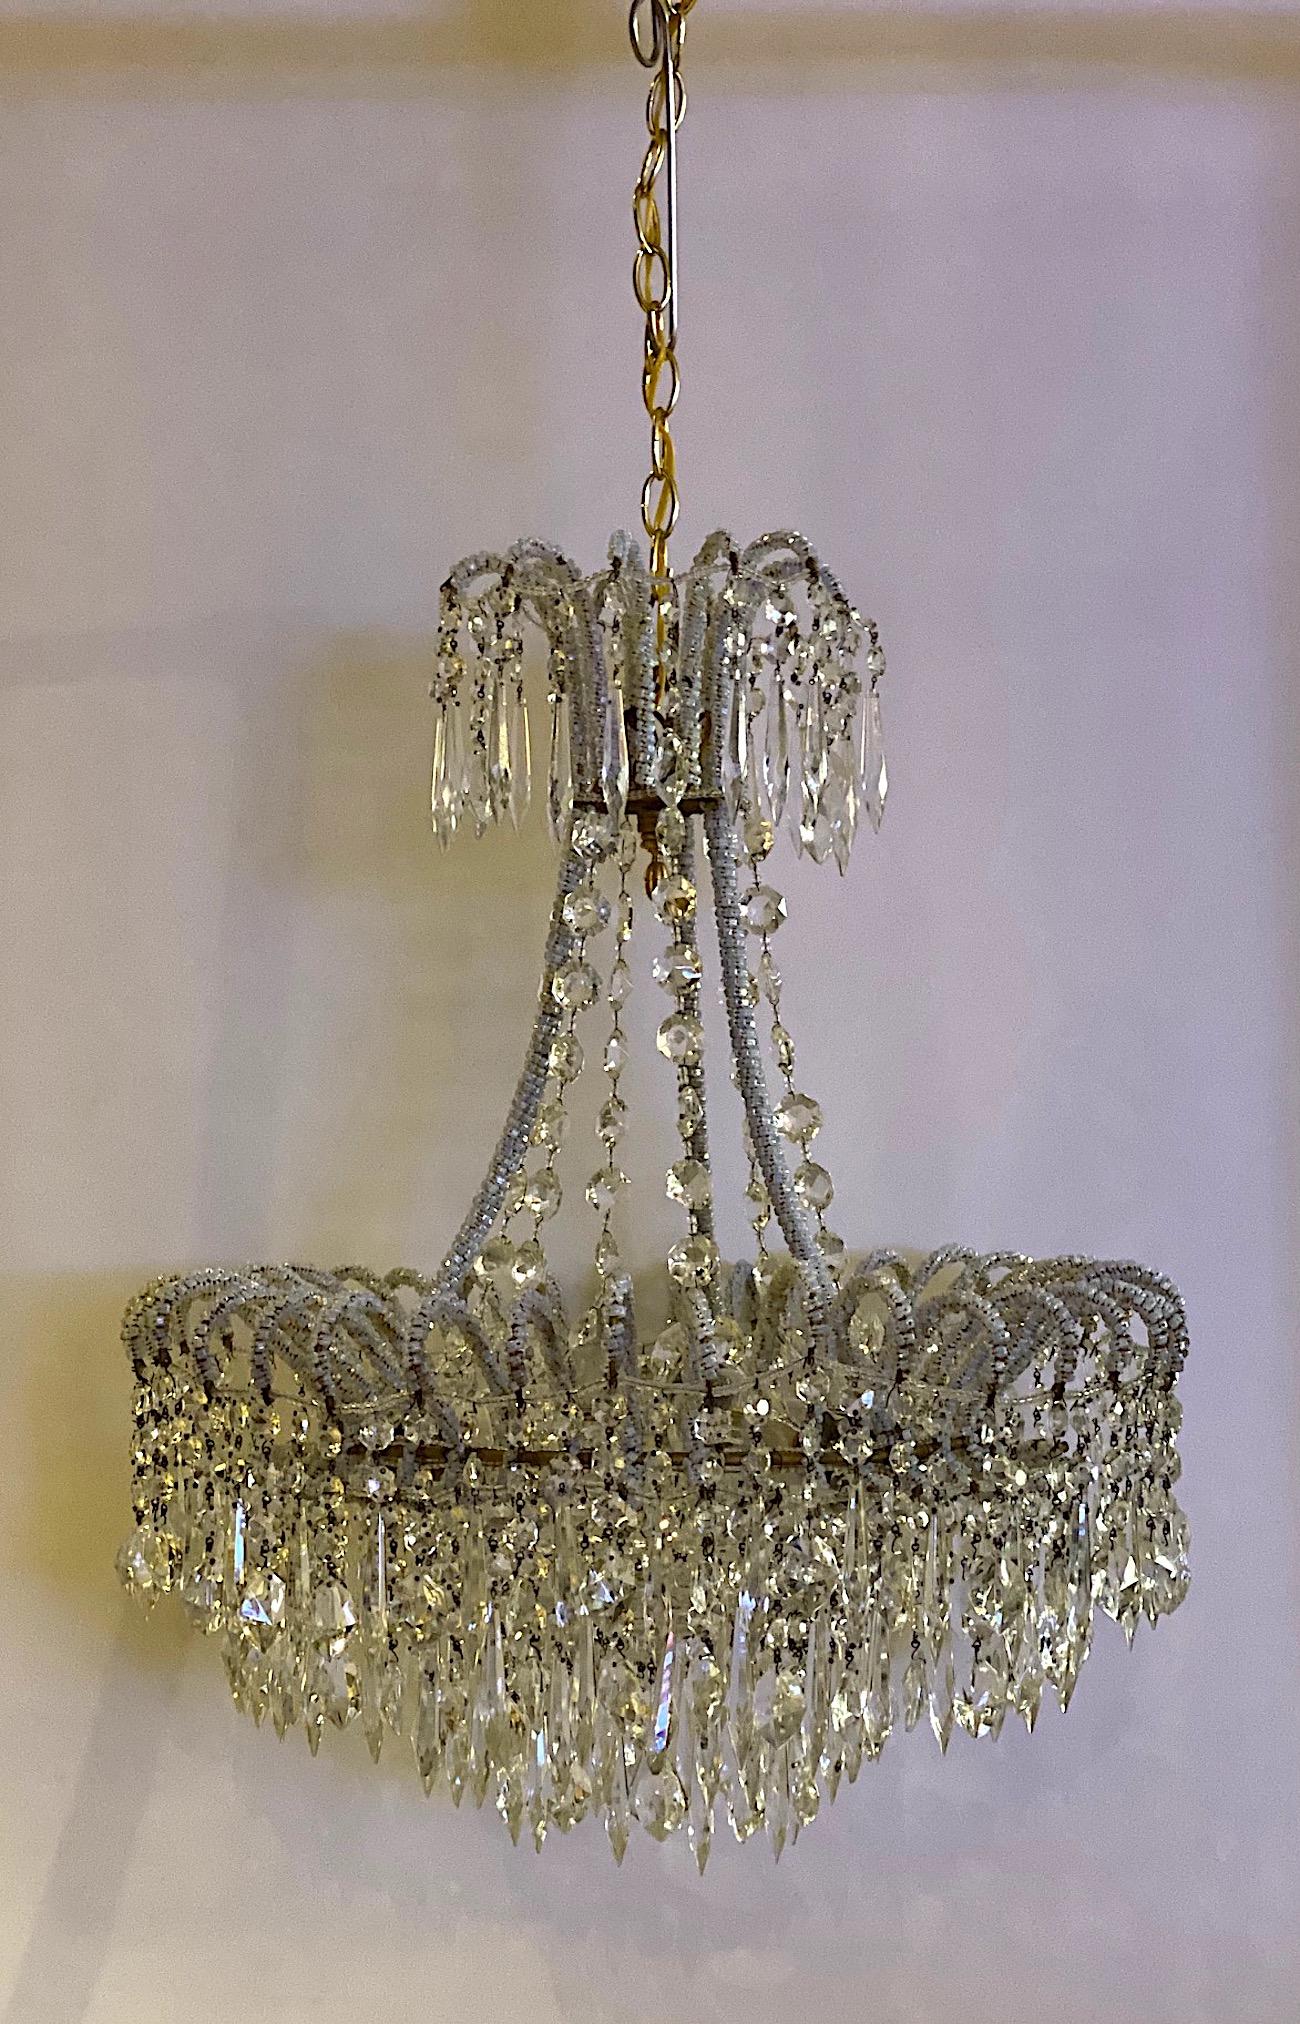 A truly charming and elegant Italian made 1950s Hollywood Regency style chandelier. The body of the chandelier is 21 inches in diameter and 25 inched tall. The three main iron supports attaché to a large ring on the bottom and a smaller one on top.